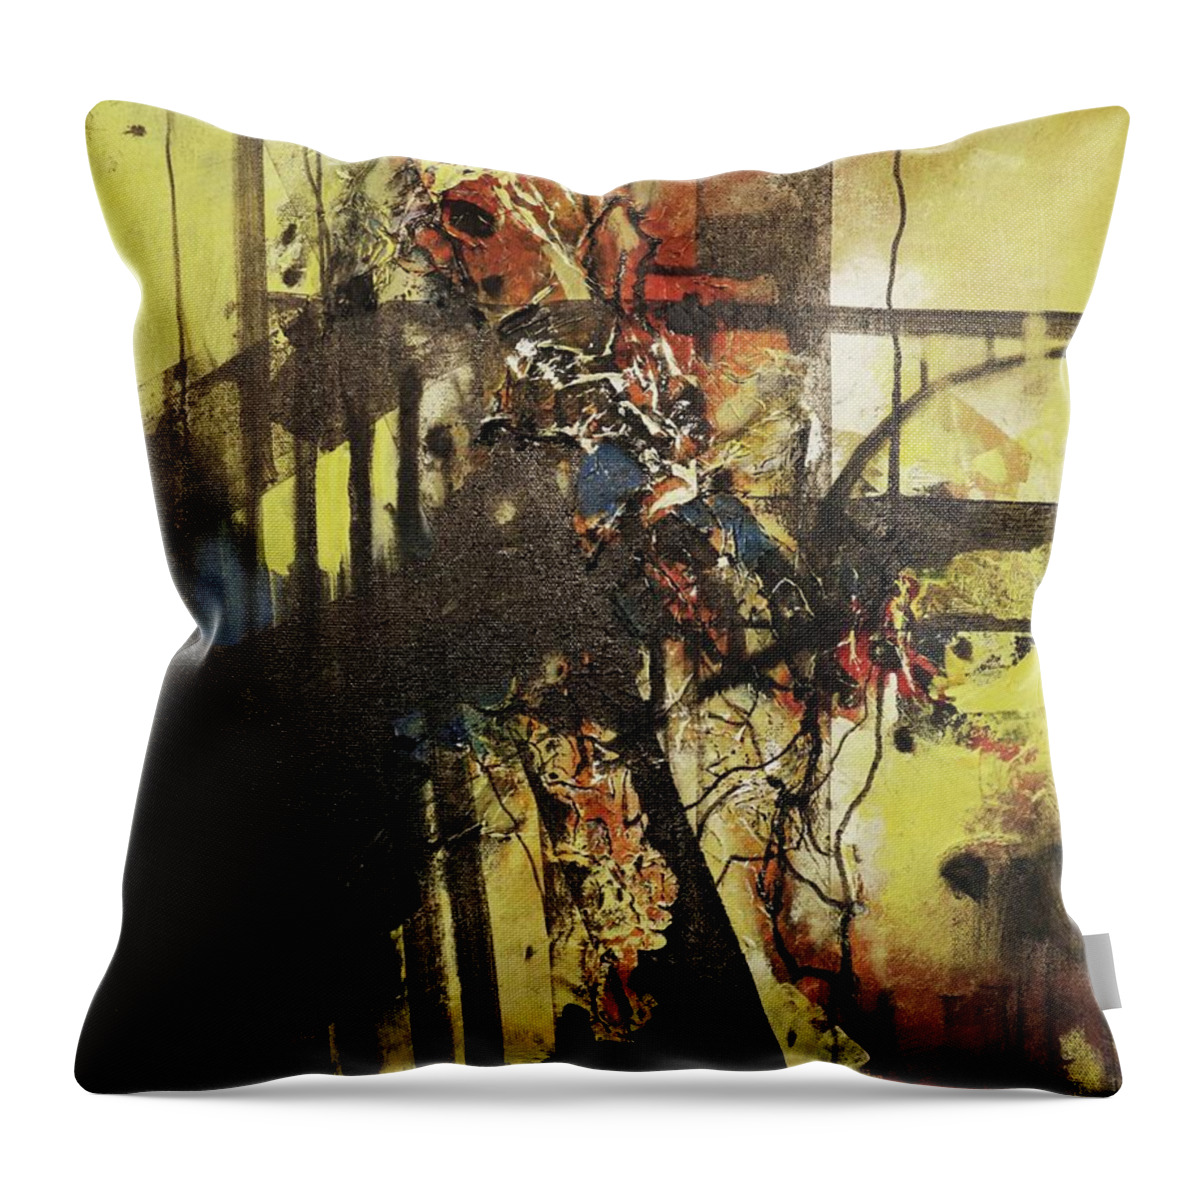 Infrastructure Throw Pillow featuring the painting Infrastructure by Tom Shropshire